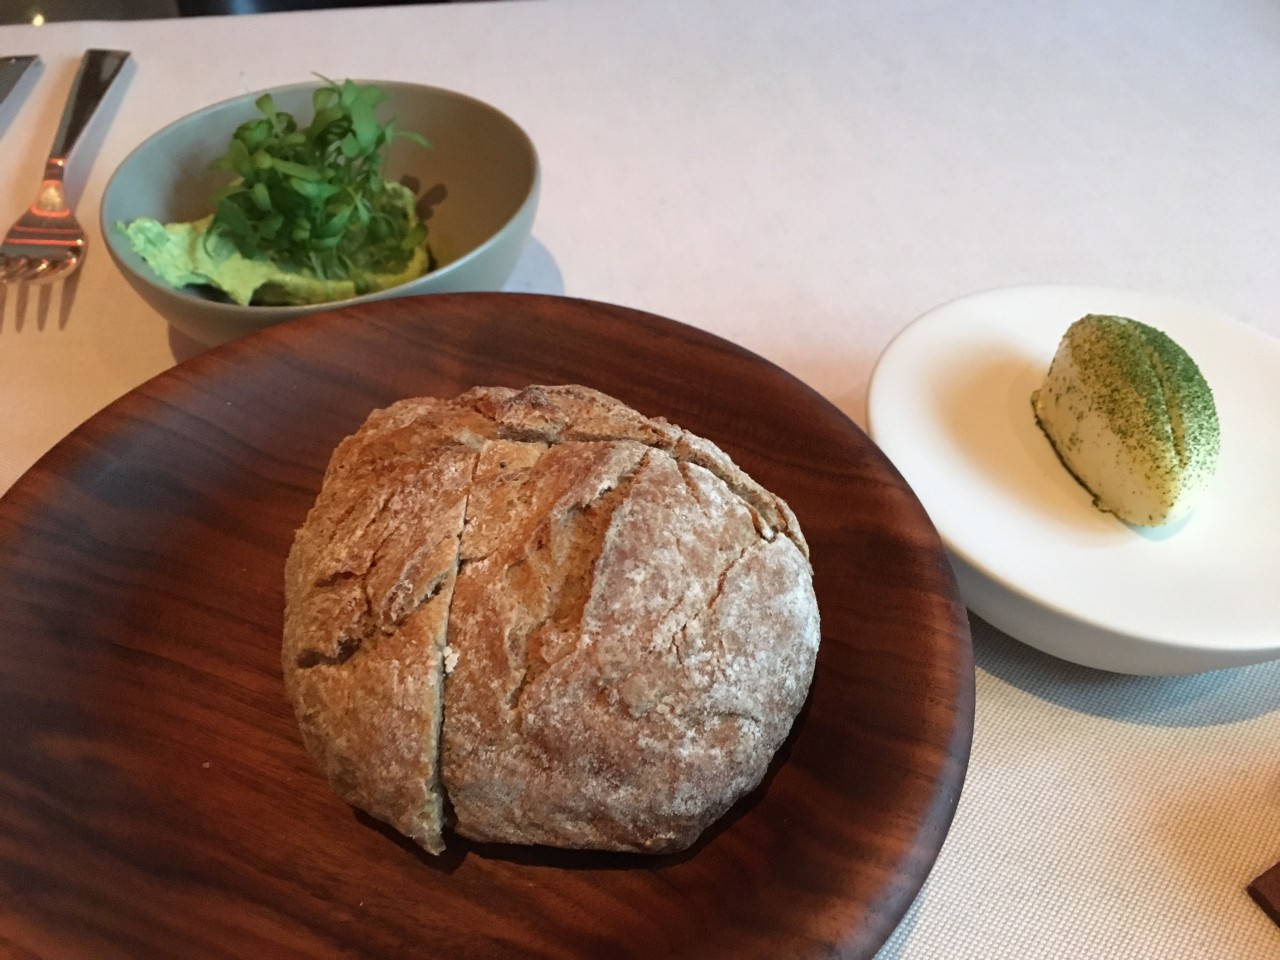 Buckwheat Bread with Butter and Herb Dip, Restaurant Focus, Vitznau Review